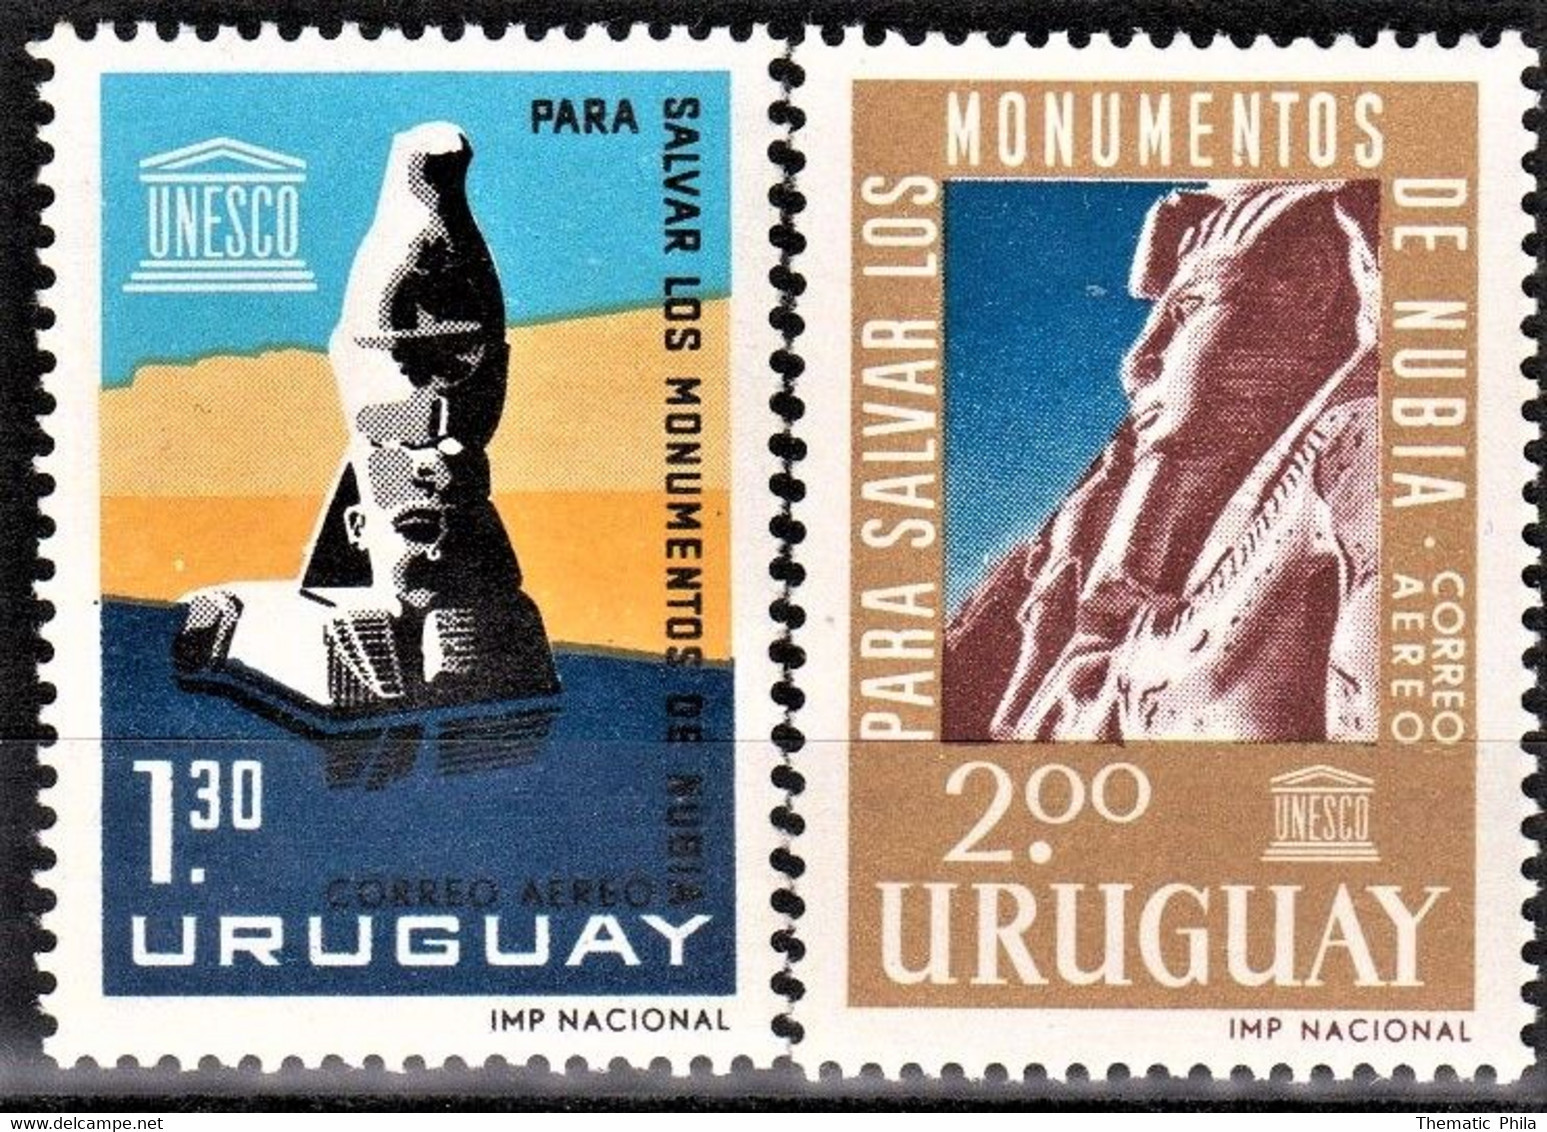 Uruguay 1964  New - Monuments  Nubie Nubia Egyptian Temples Abou Ramses II  - Yvert Air Mail A252/3 - Uruguay